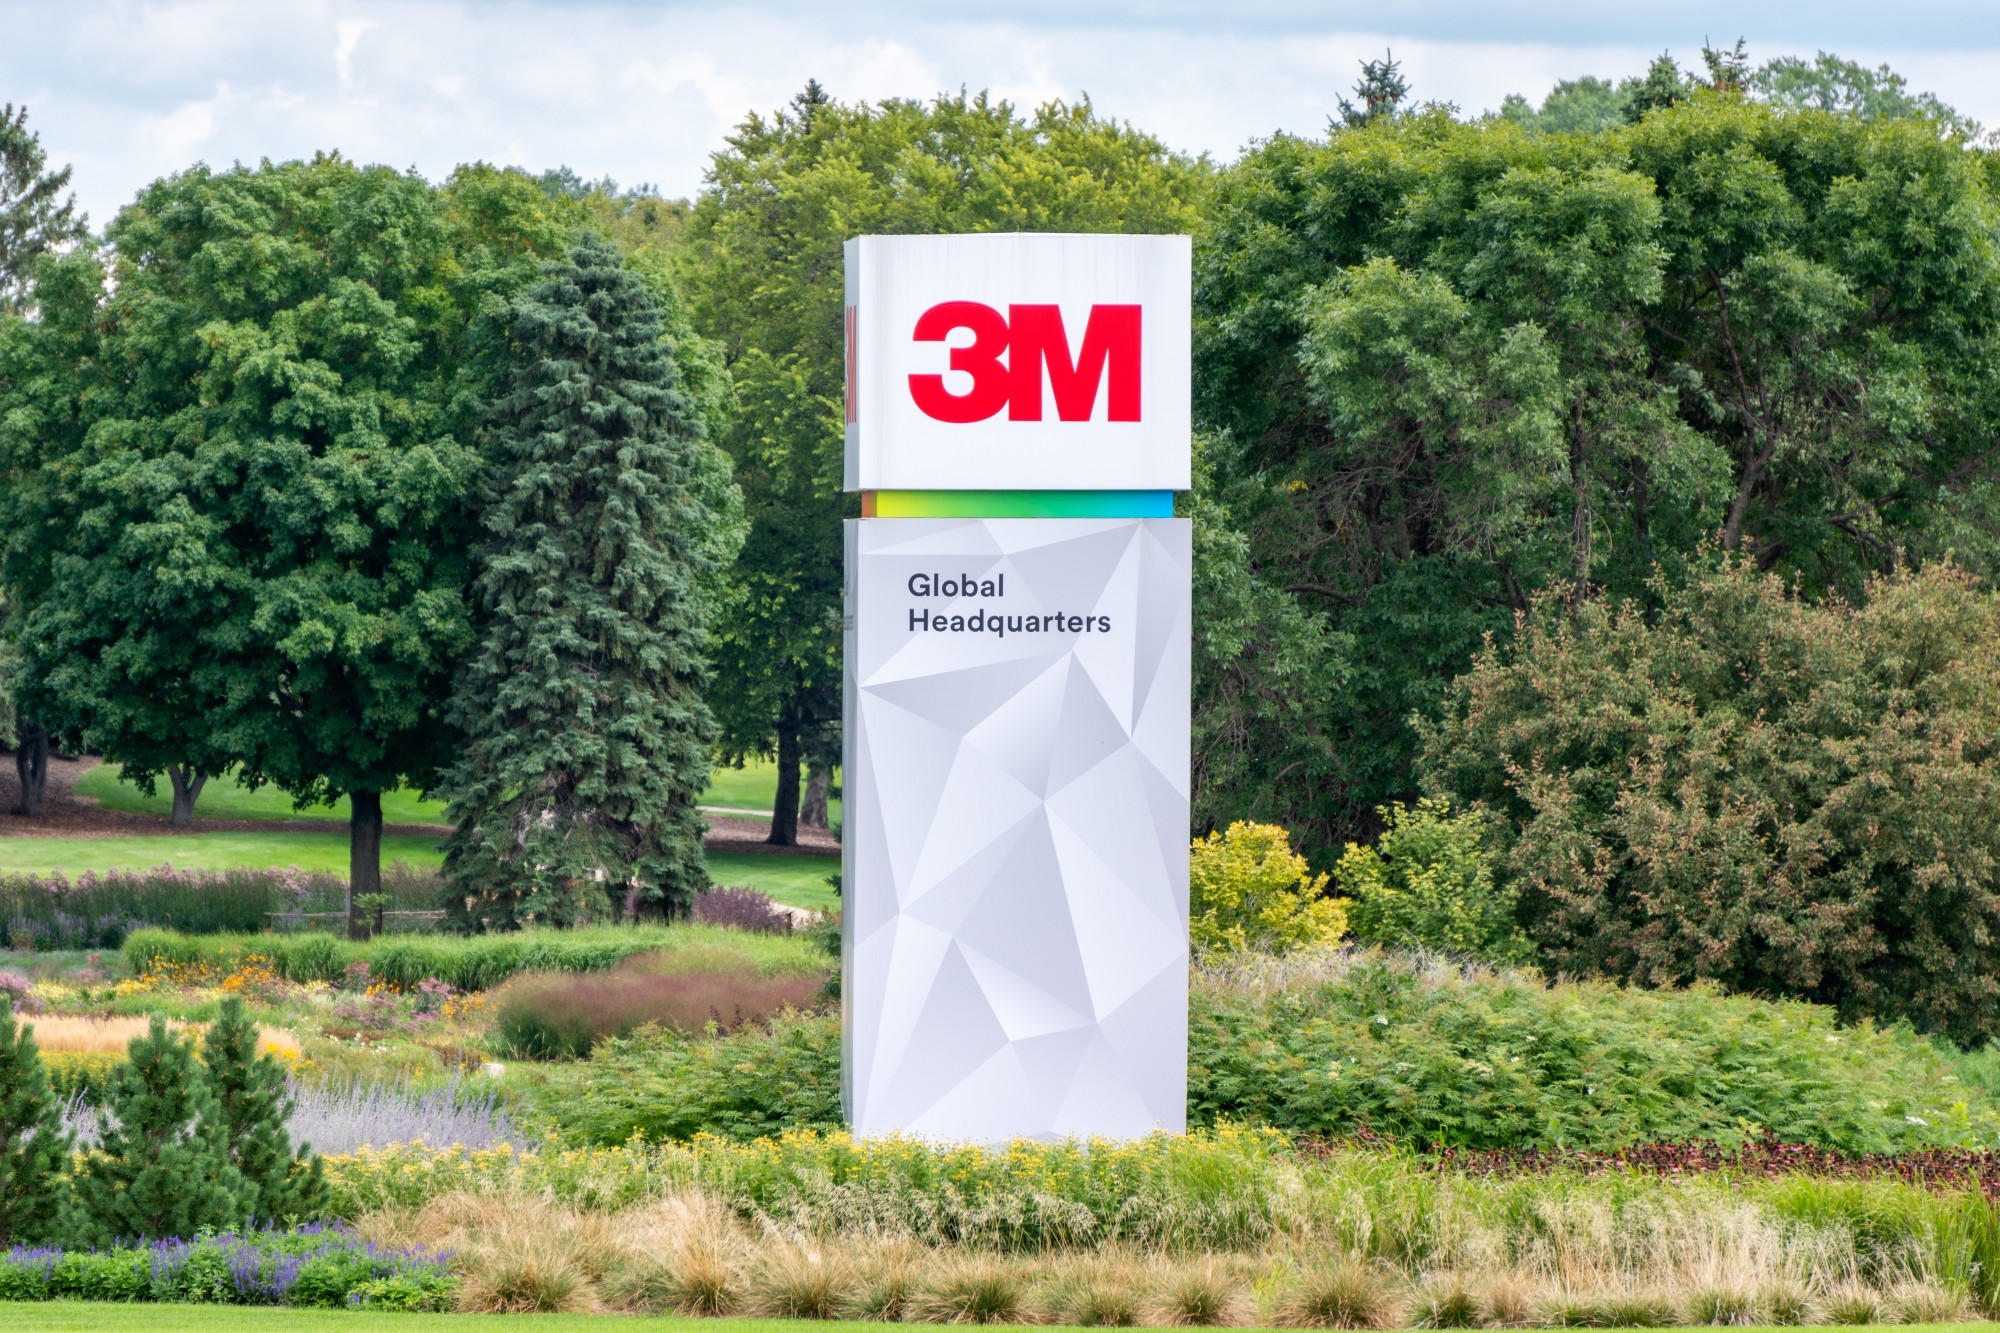 3M Achieves 34 Superior Energy Performance 50001™ Certifications